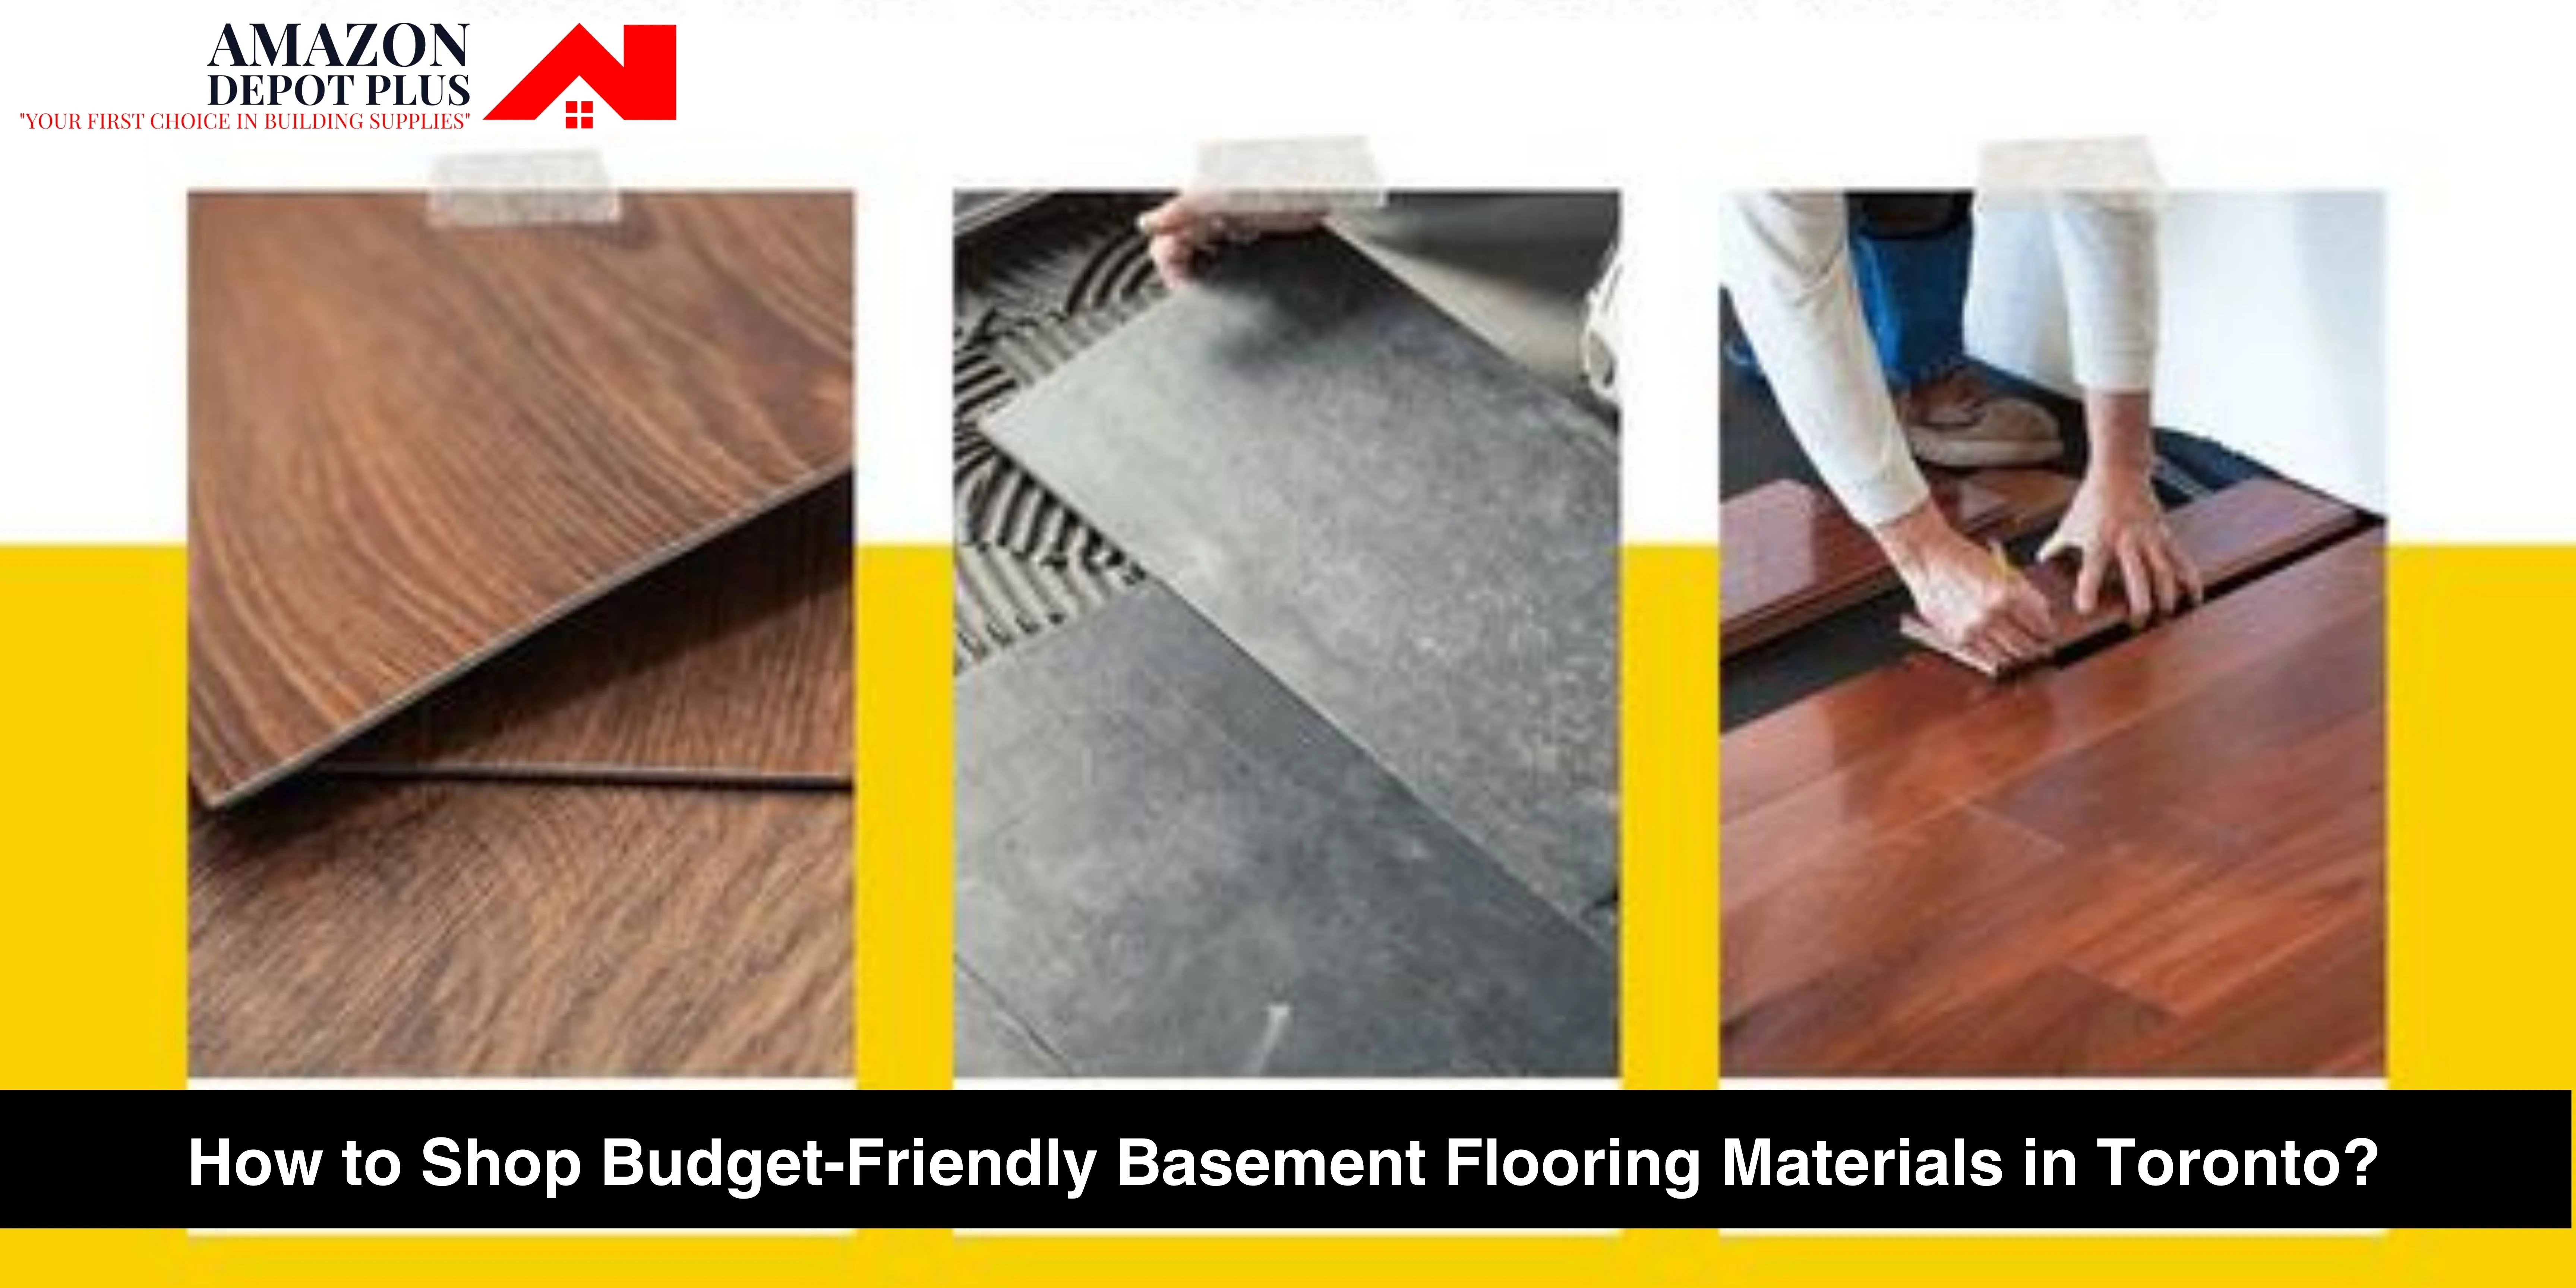 How to Shop Budget-Friendly Basement Flooring Materials in Toronto?